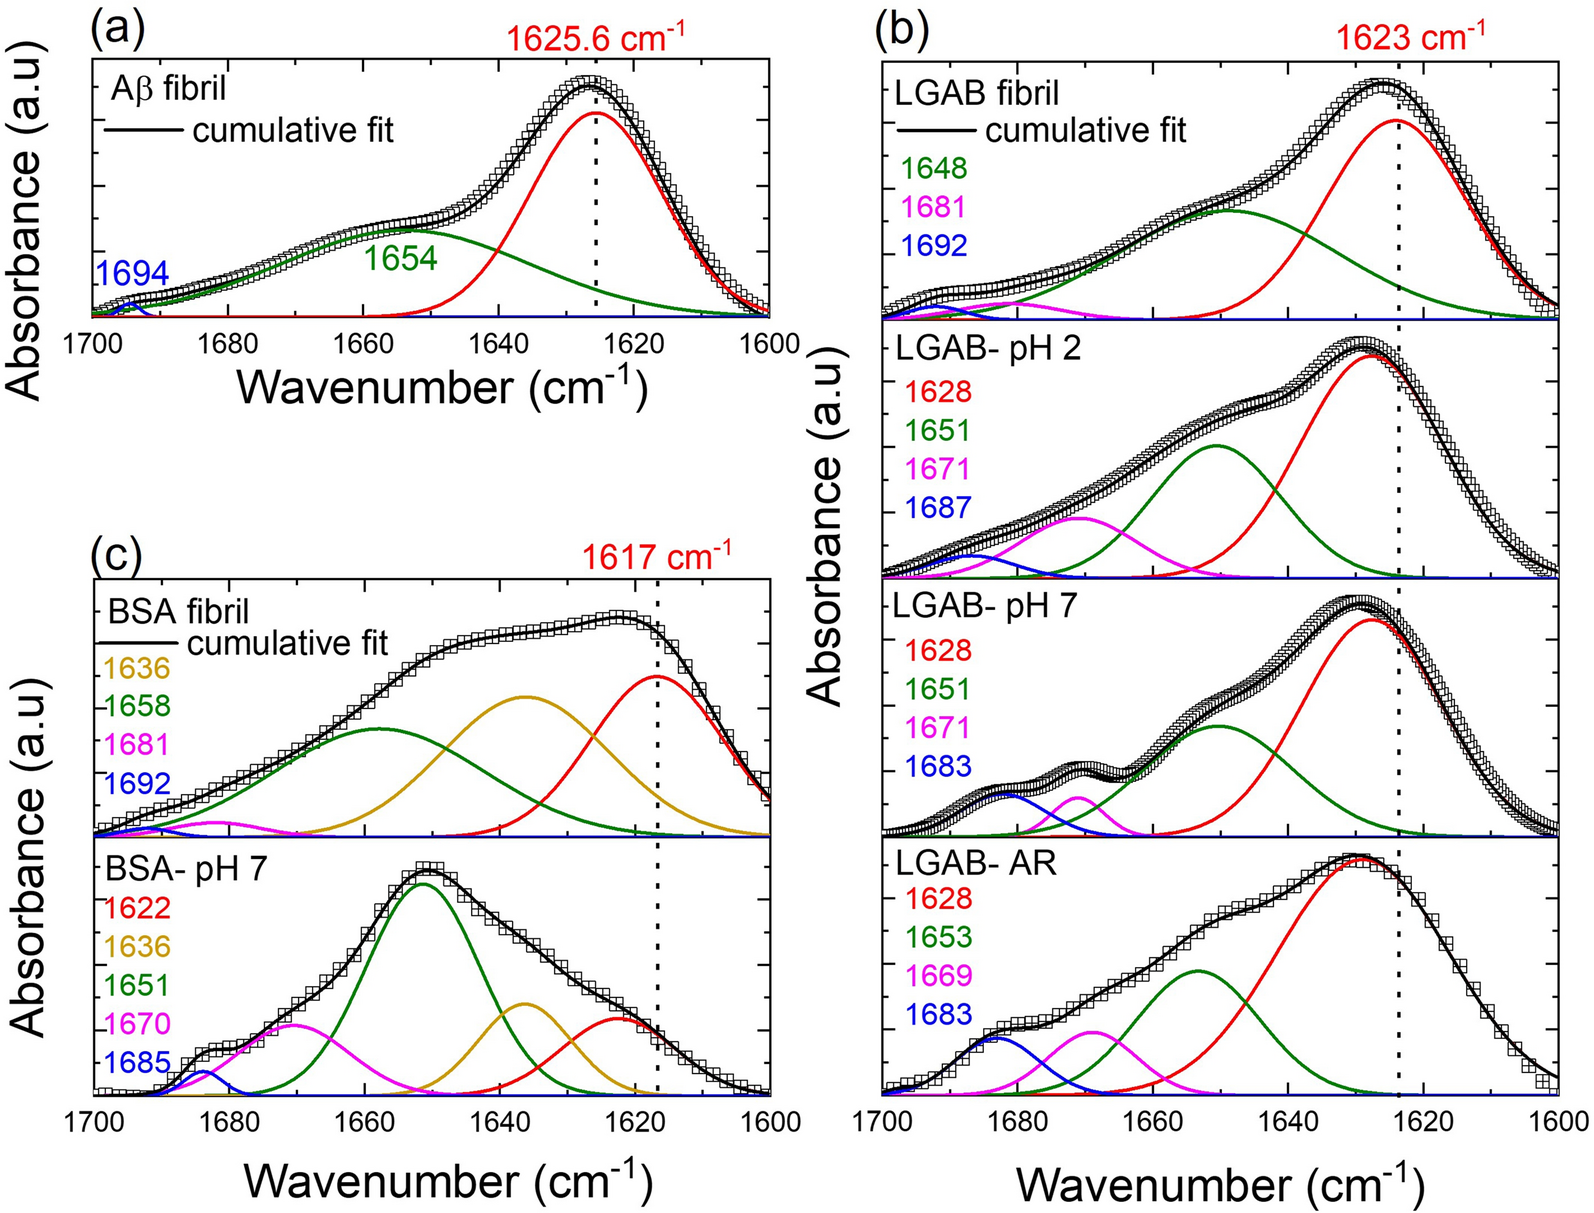 Synthetic β-sheets mimicking fibrillar and oligomeric structures for evaluation of spectral X-ray scattering technique for biomarker quantification